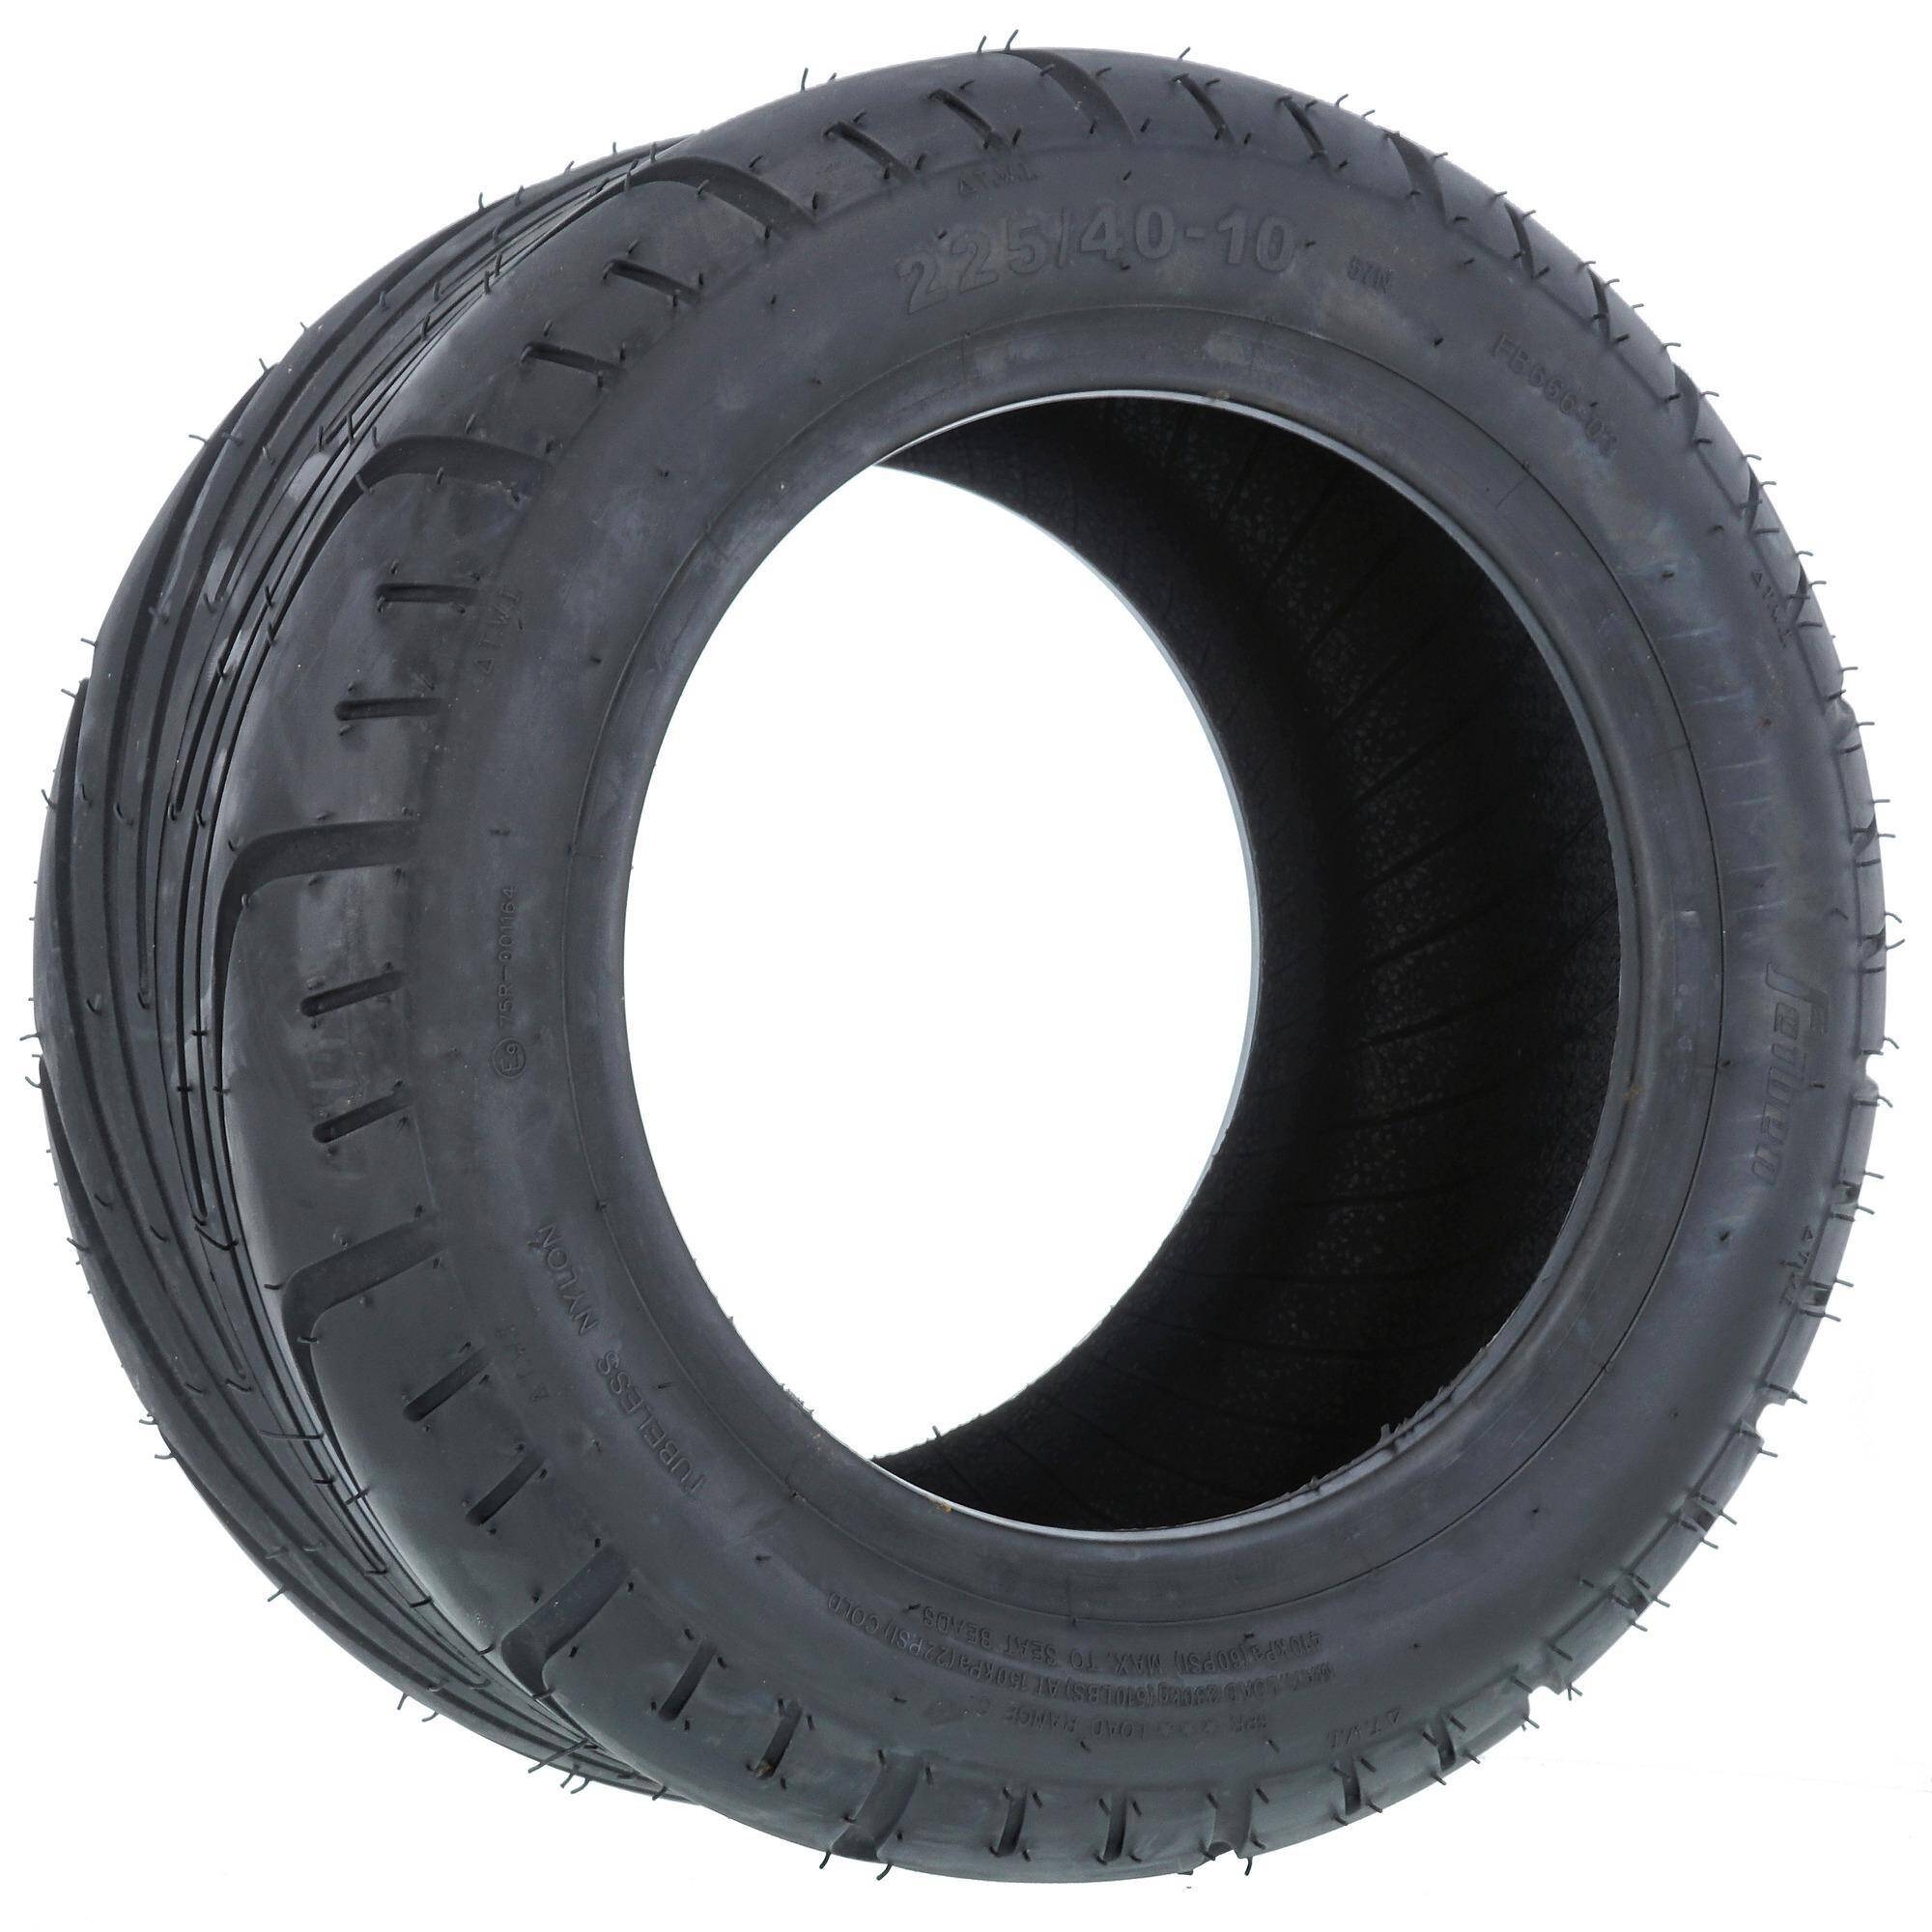 TIRES FOR MOTORCYCLES AND SCOOTERS